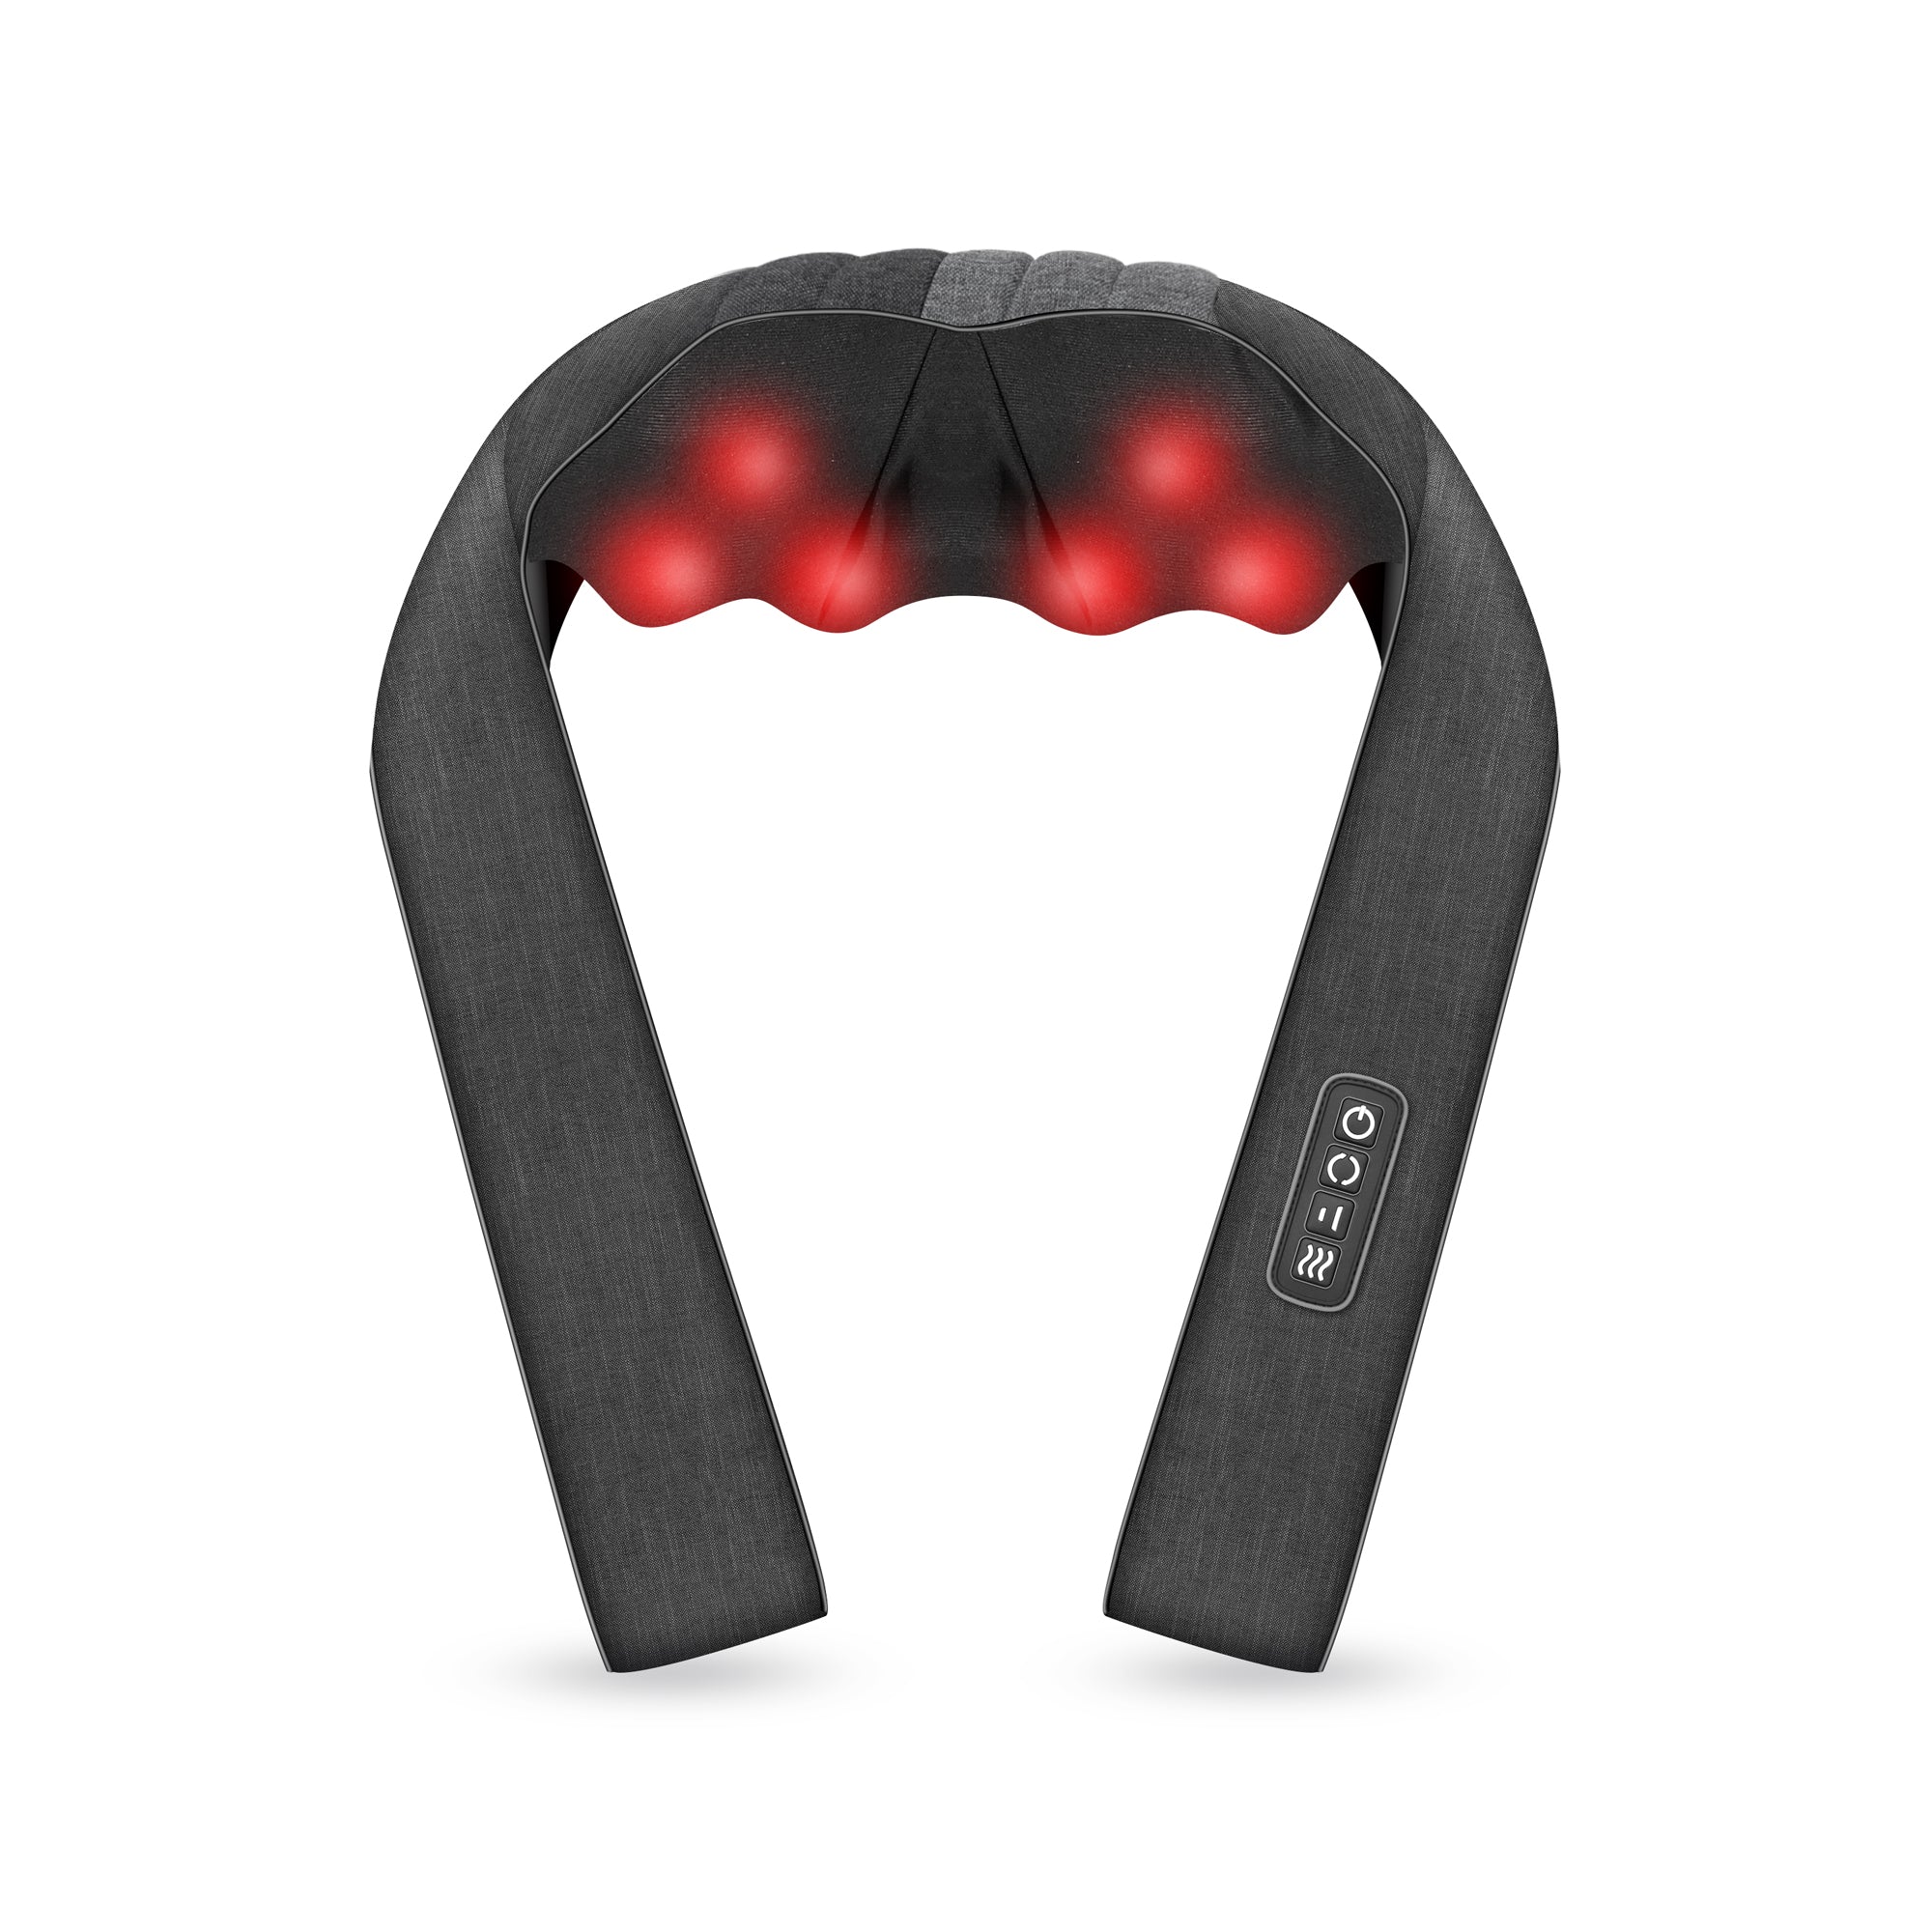 COMFIER Shiatsu Neck&Back Massager APP Control,Massagers for Neck and Back  with Heat,Height Adjustab…See more COMFIER Shiatsu Neck&Back Massager APP